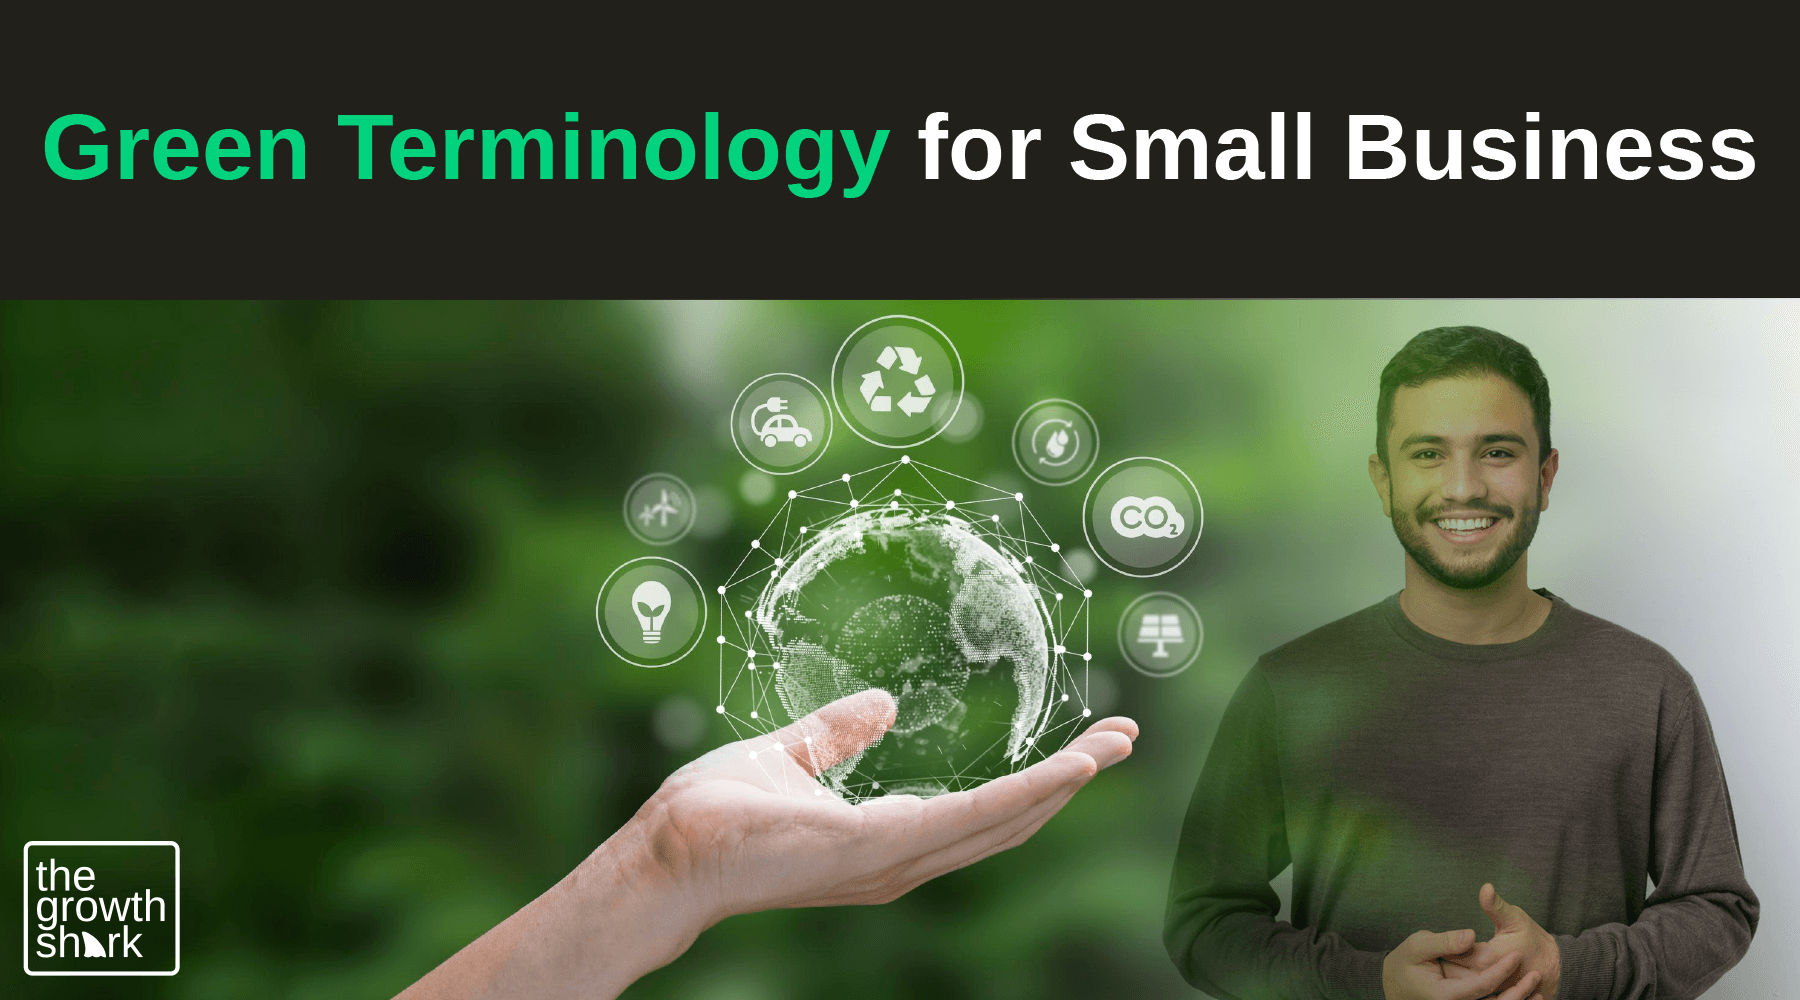 Green Terminology for Small Business: Understanding and Incorporating Proper Terms